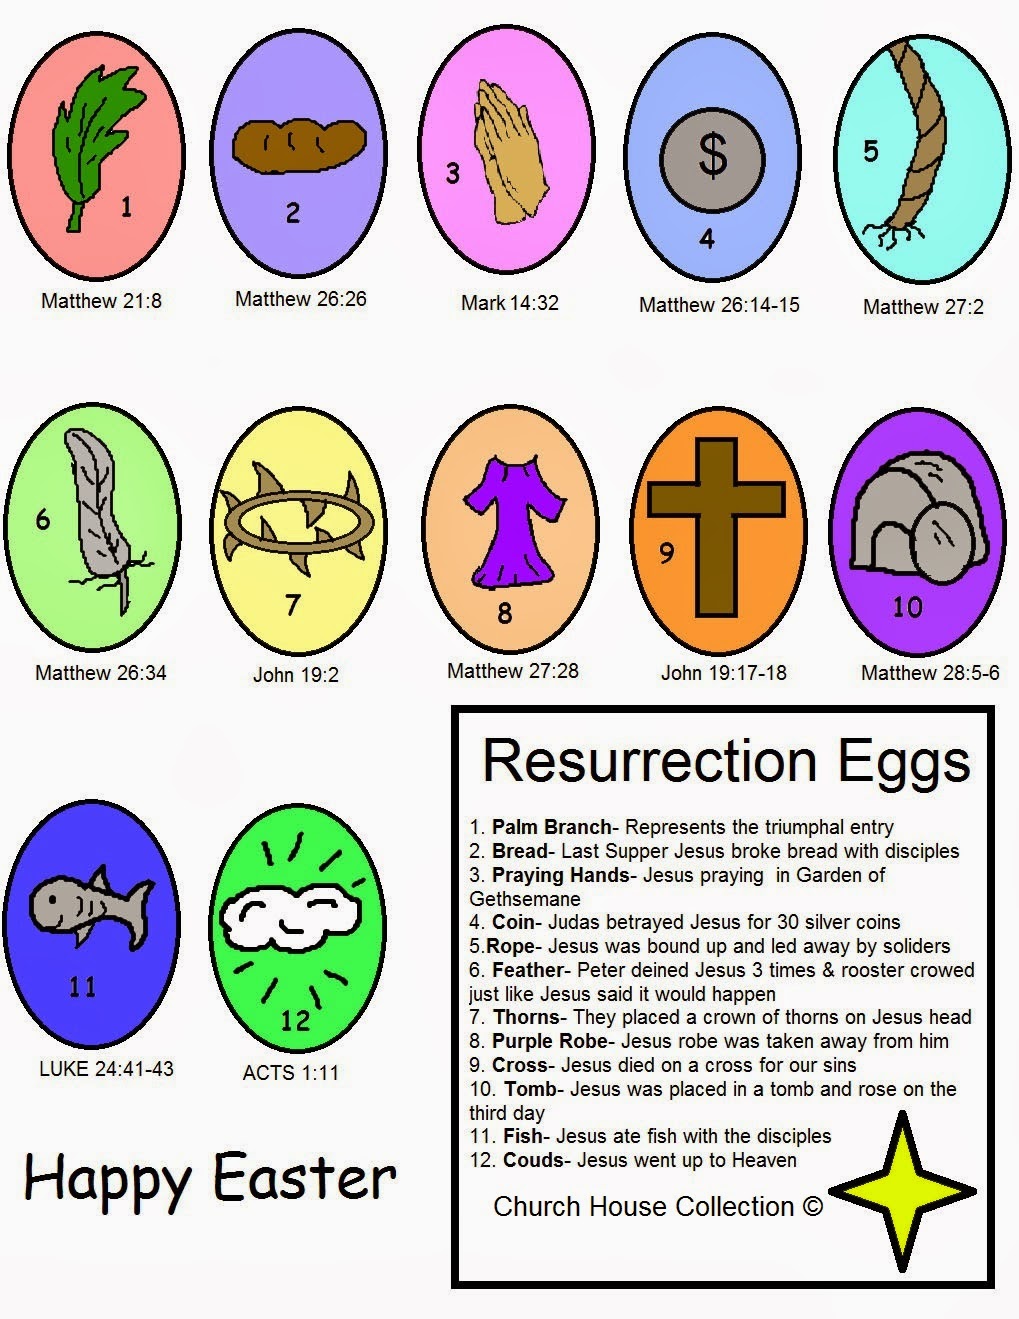 church-house-collection-blog-easter-resurrection-eggs-craft-free